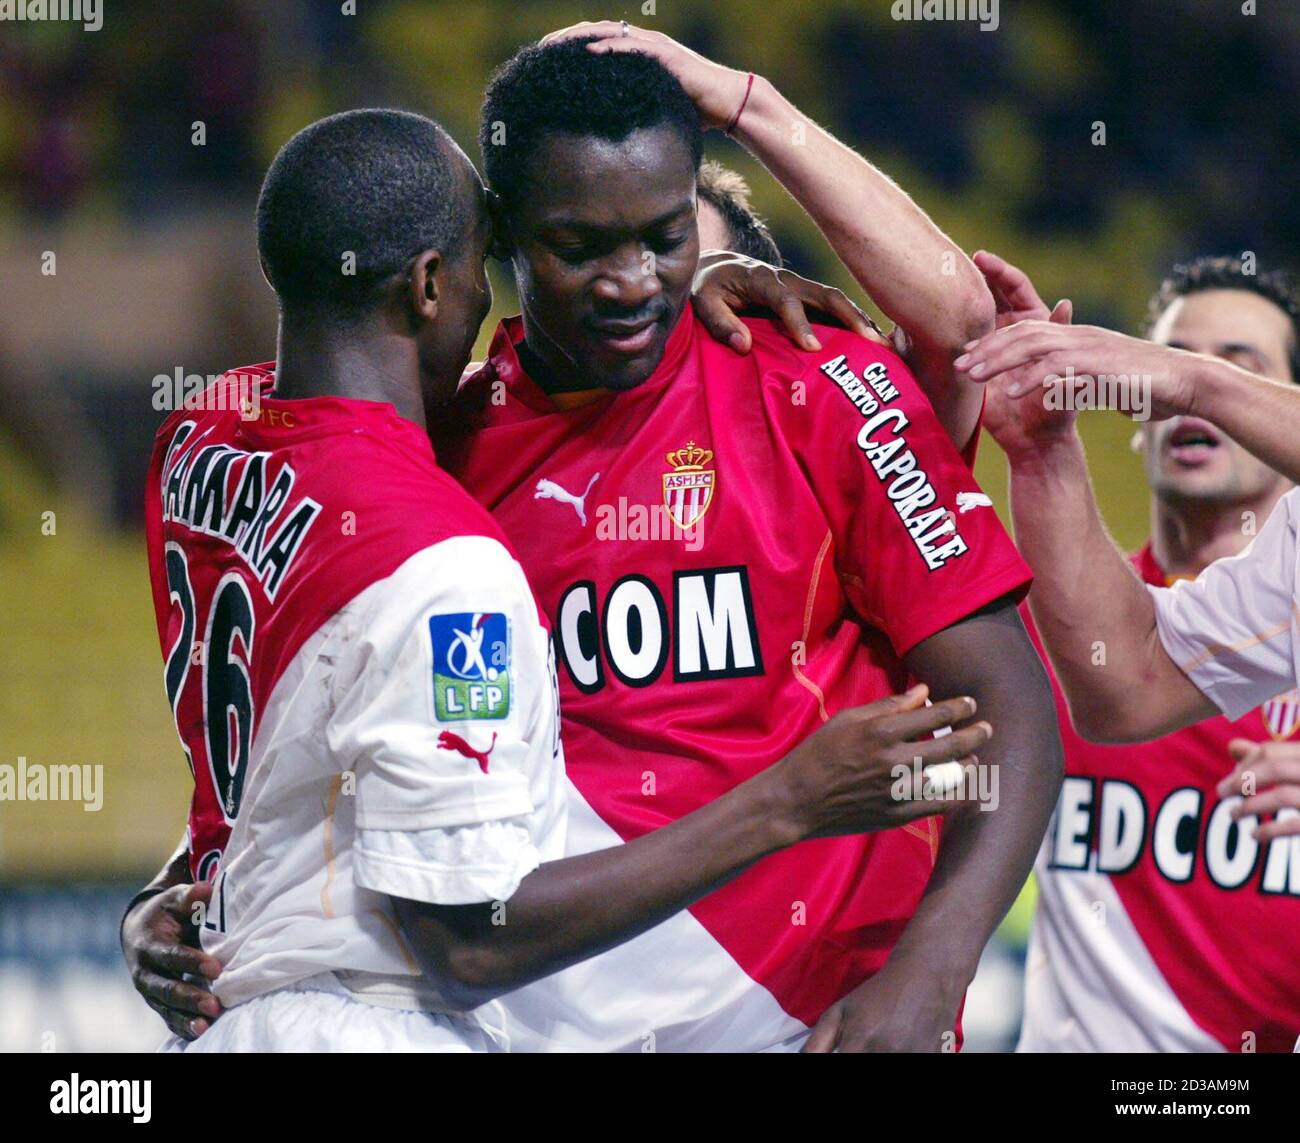 Monaco's Shabani Nonda (C) is congratulated by team mate Souleymane Camara(L)  after he scored a goal during the french league soccer match between Monaco  and Guingamp in Monaco December 15, 2002. REUTERS/Eric